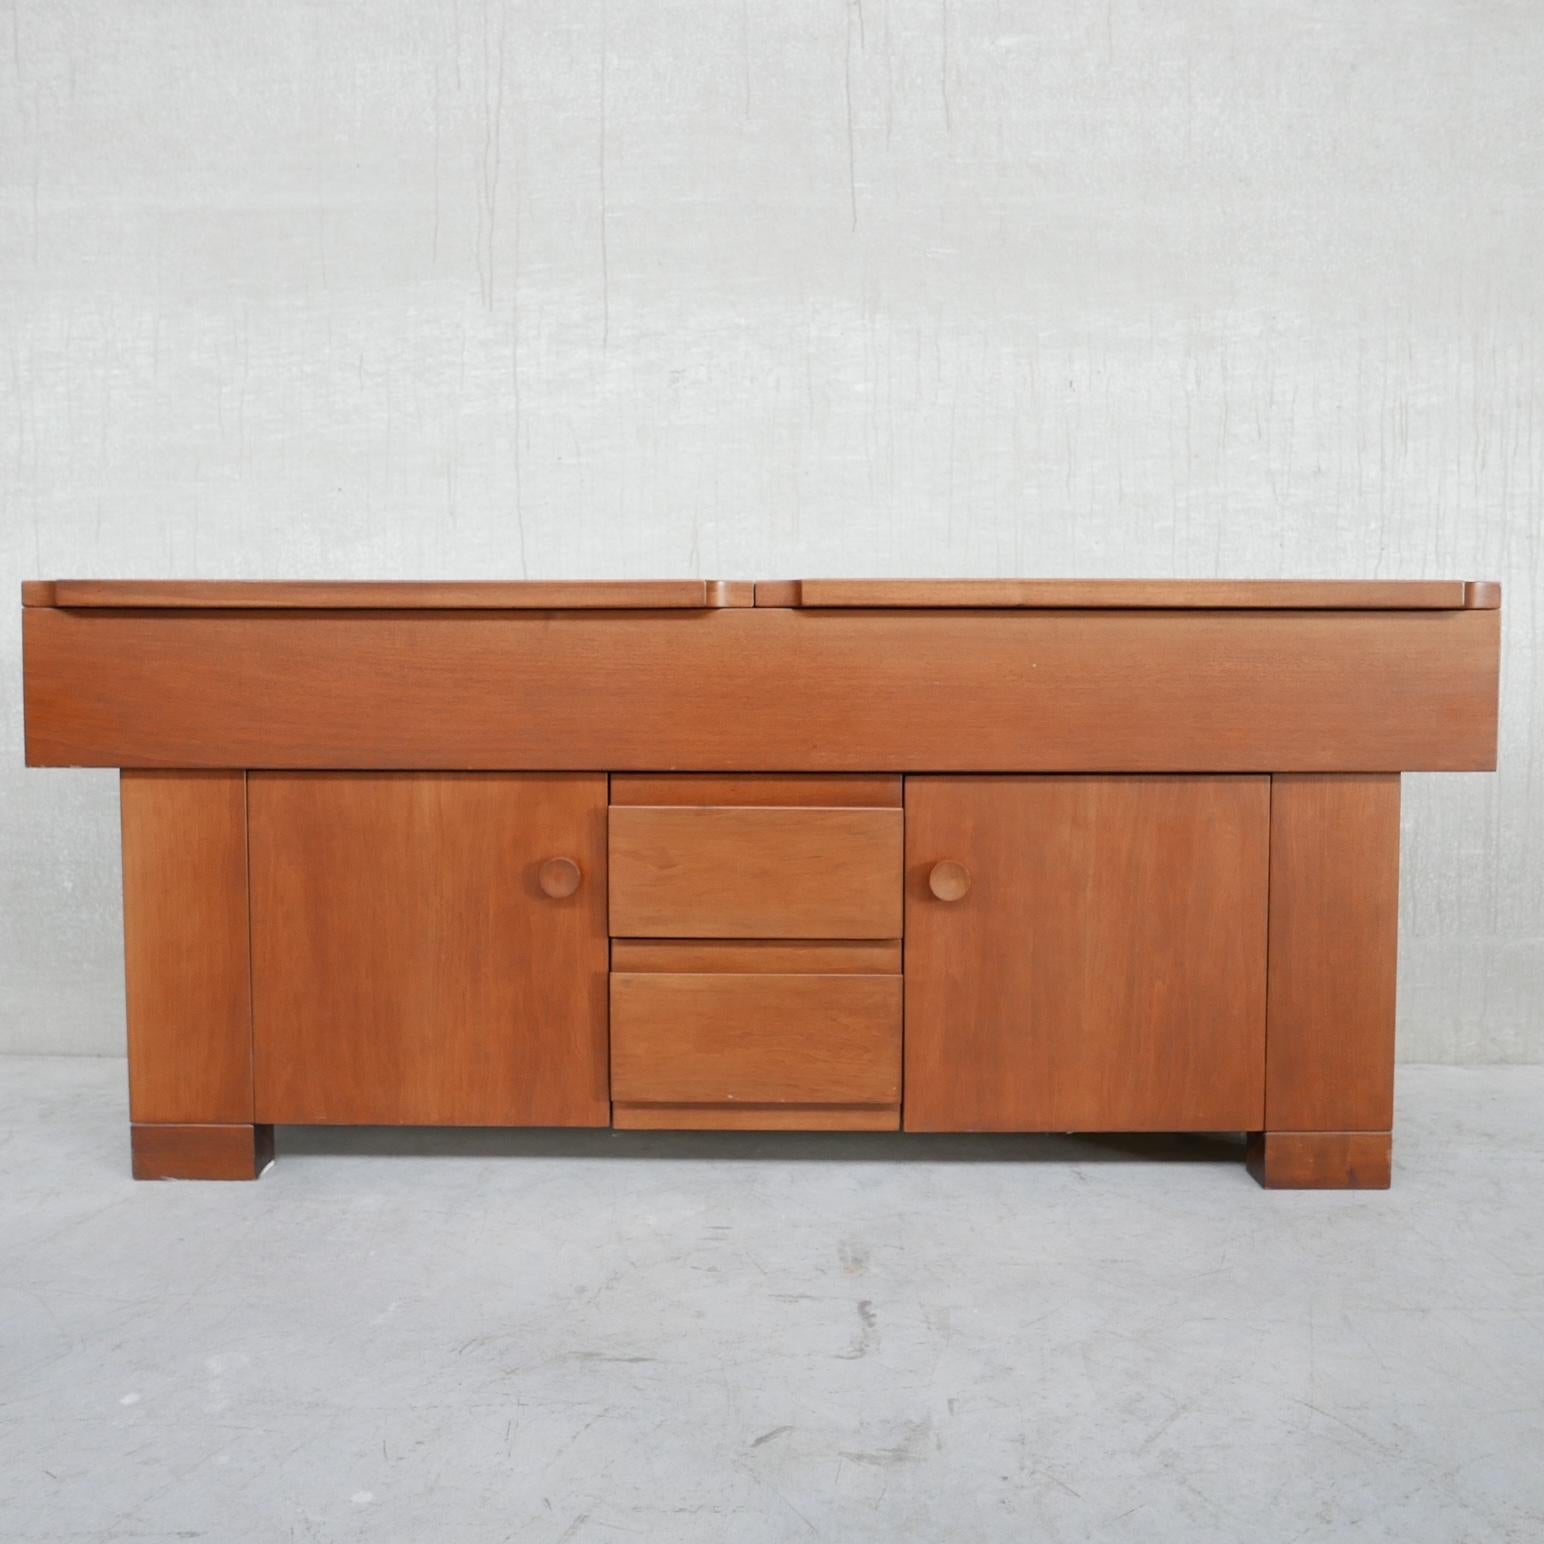 A walnut sideboard, by Giovanni Michelucci for Poltronova. 

'Torbecchia' model. 

Italy, c1960s. 

Drawers, to the front with two cabinets, the top also raises for additional storage options. 

Strong firm lines create a handsome look.